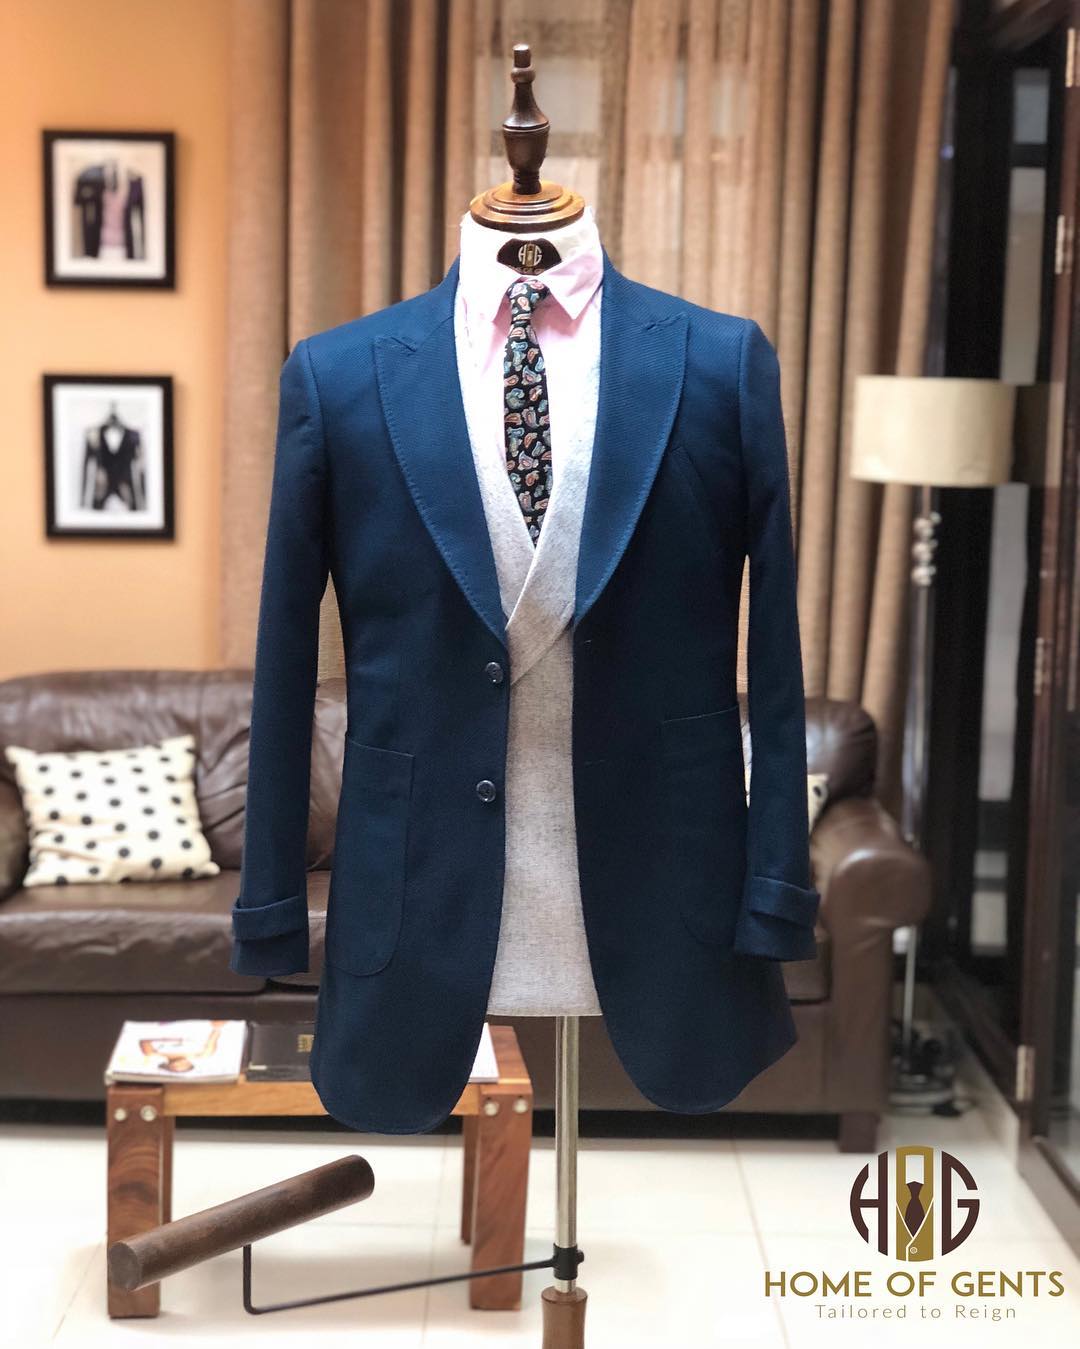 Home of Gents Uganda for: Tailored Men's Suits, Wedding Suits, Bespoke Suits & Clothing, Men's Shoes, Corporate Wear, Fashion & Styling, Custom Tailor Made Fitting Suits in Kampala Uganda.